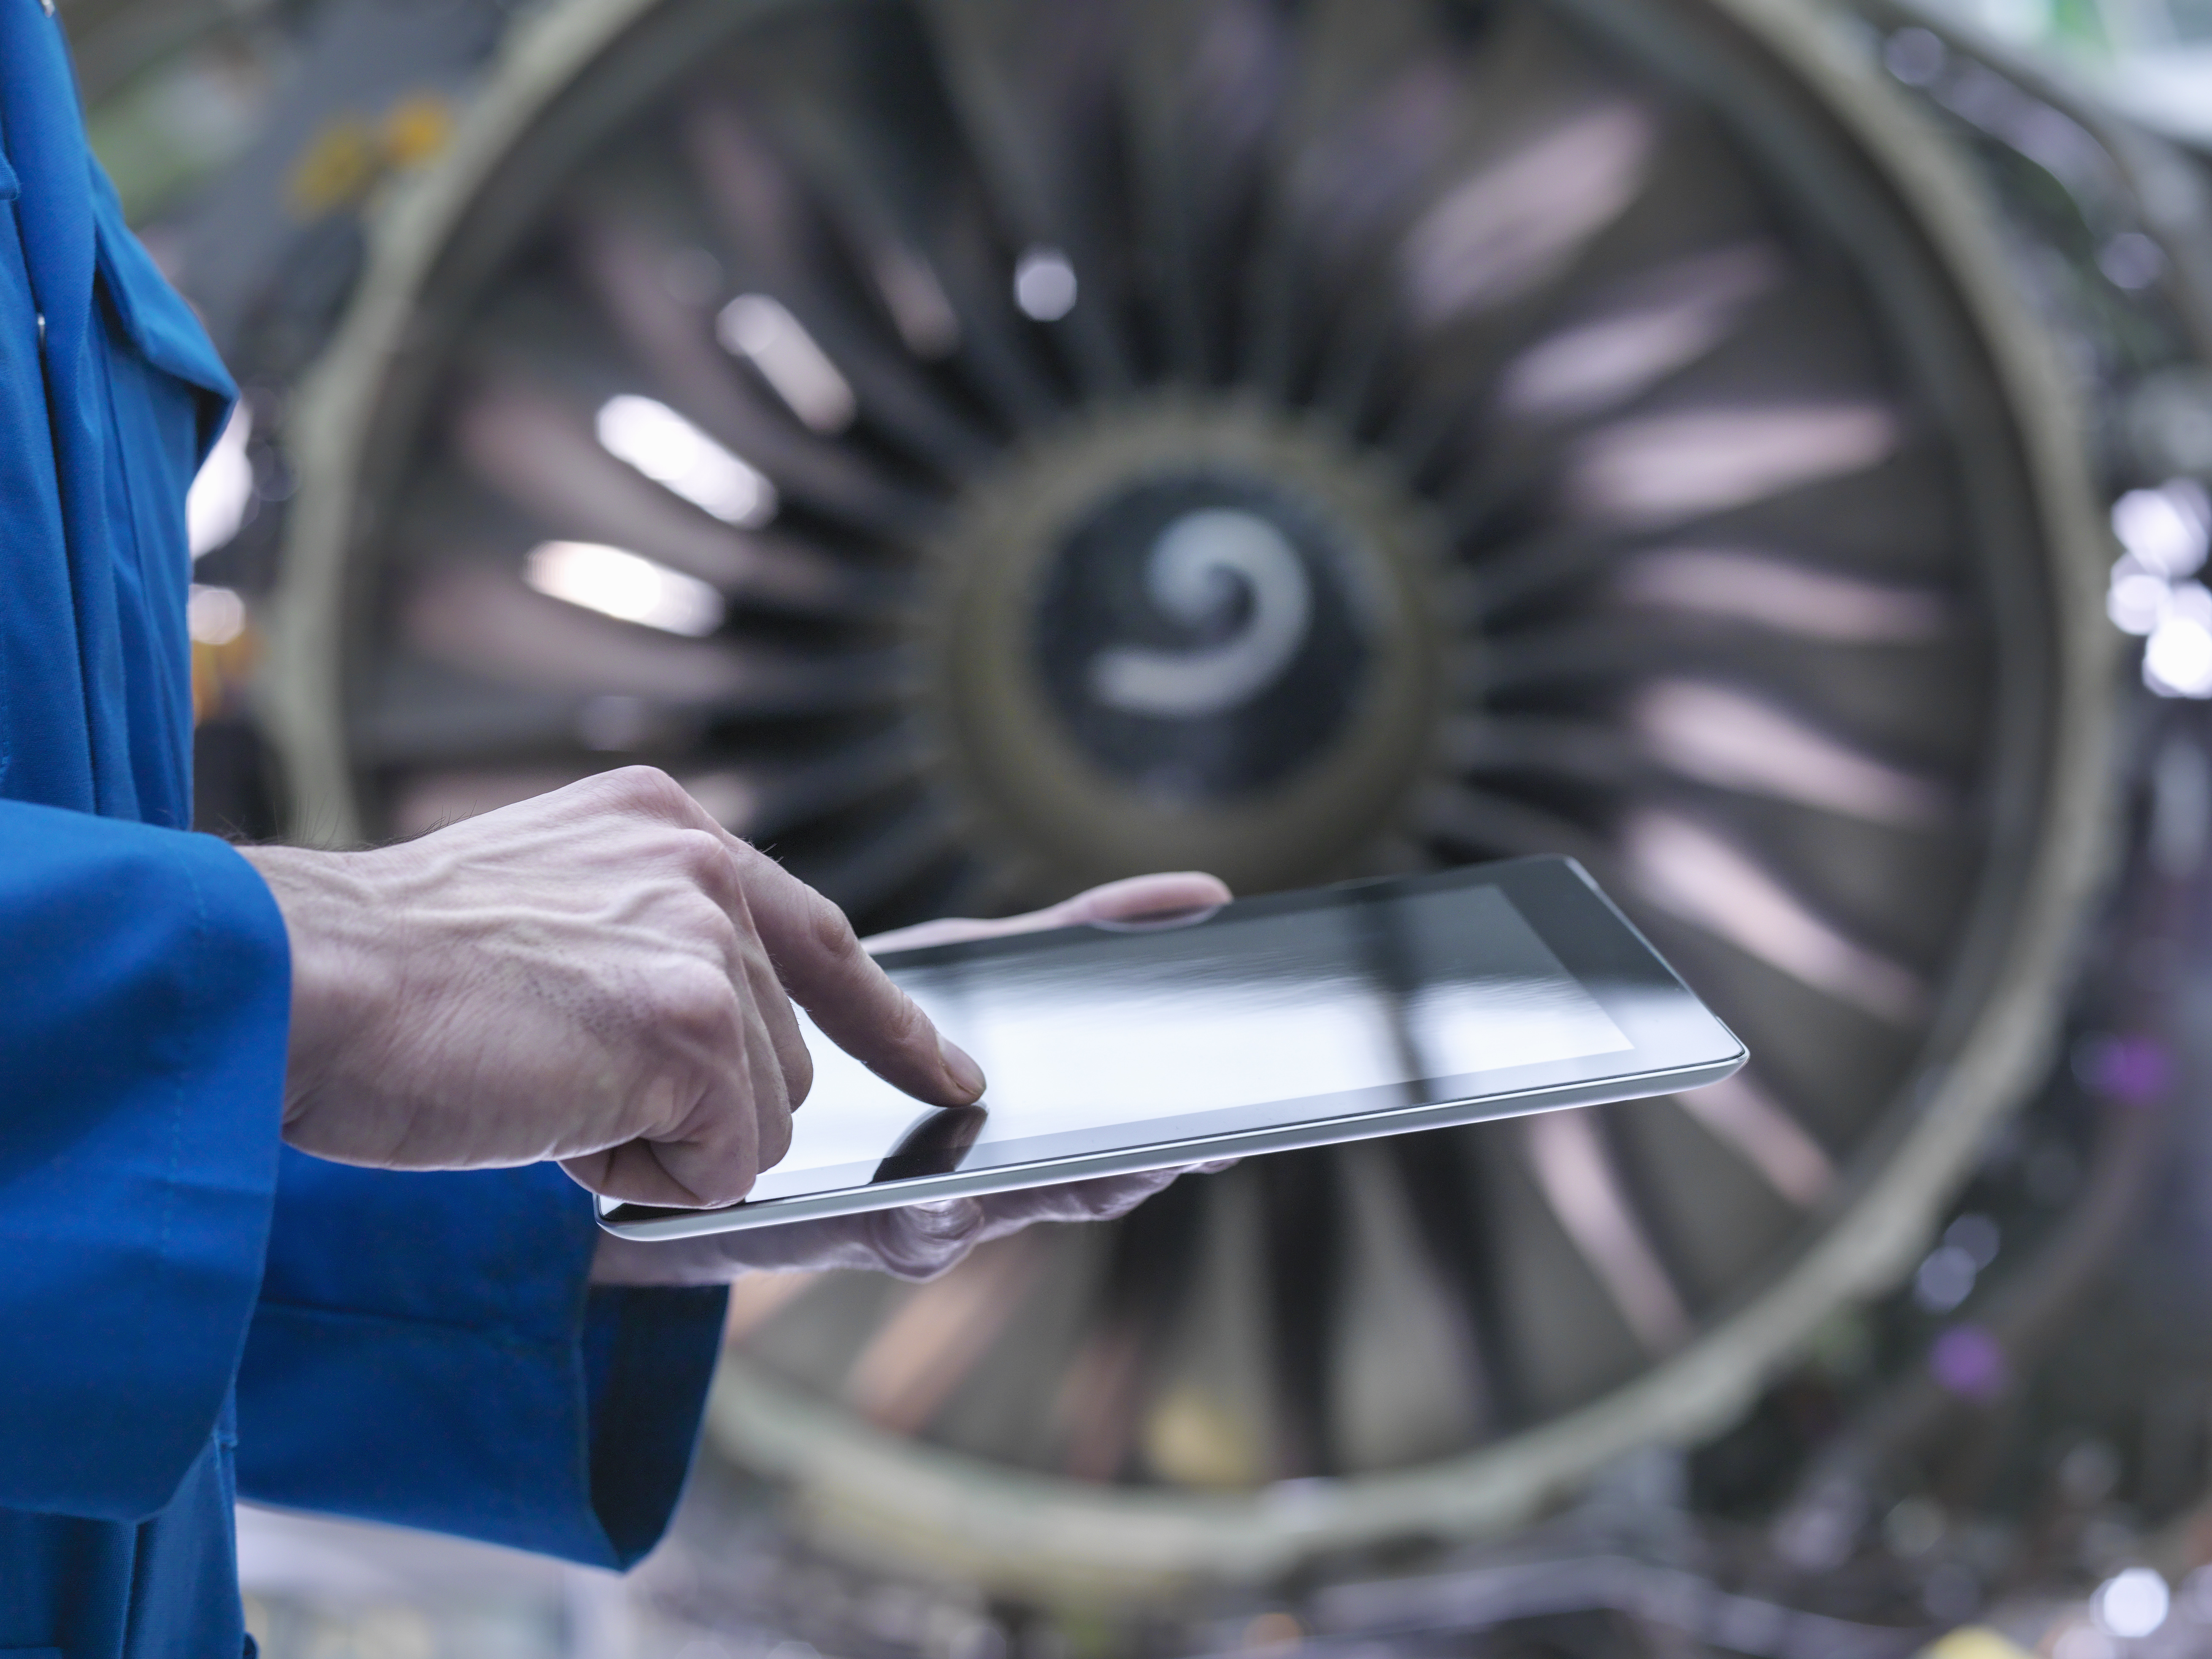 The Intelligent Enterprise for the Aerospace and Defense Industry